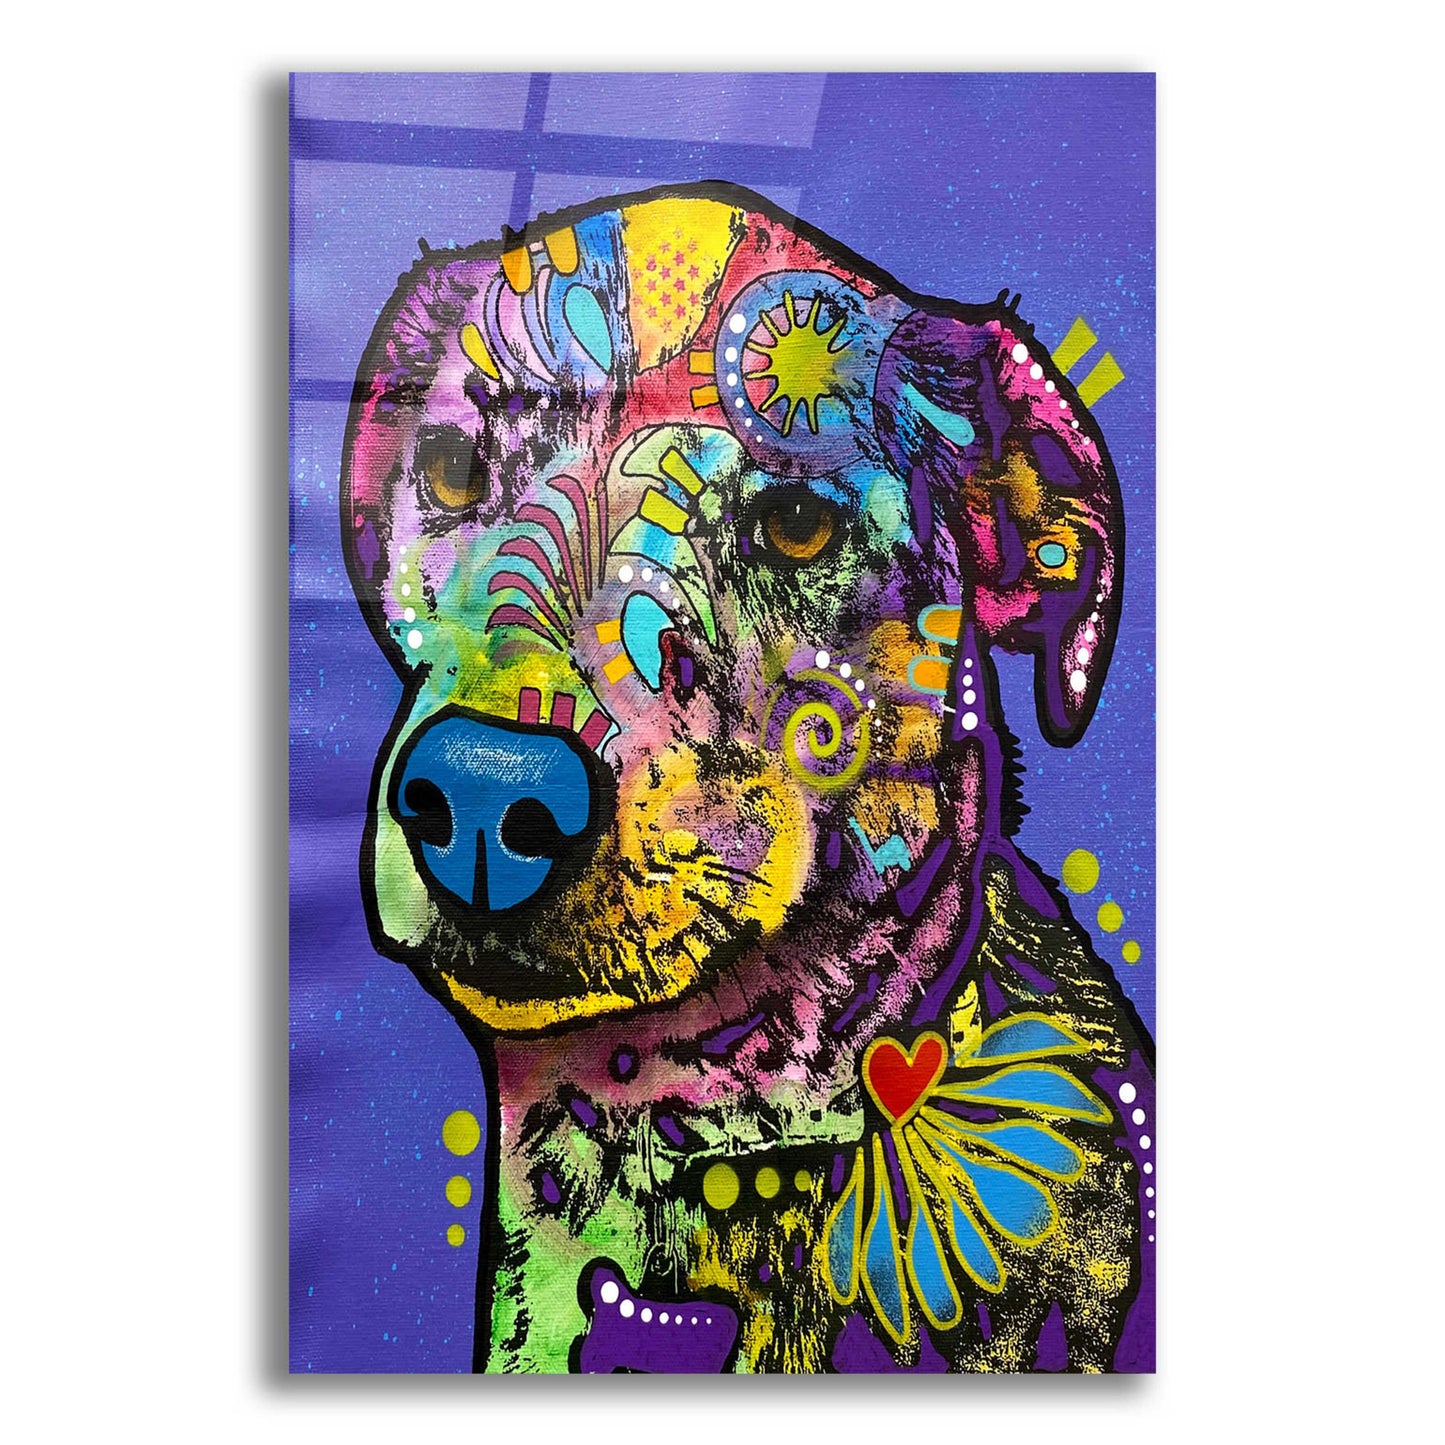 Epic Art 'And I'd Heckin Do It Again No Ragrats' by Dean Russo, Acrylic Glass Wall Art,12x16